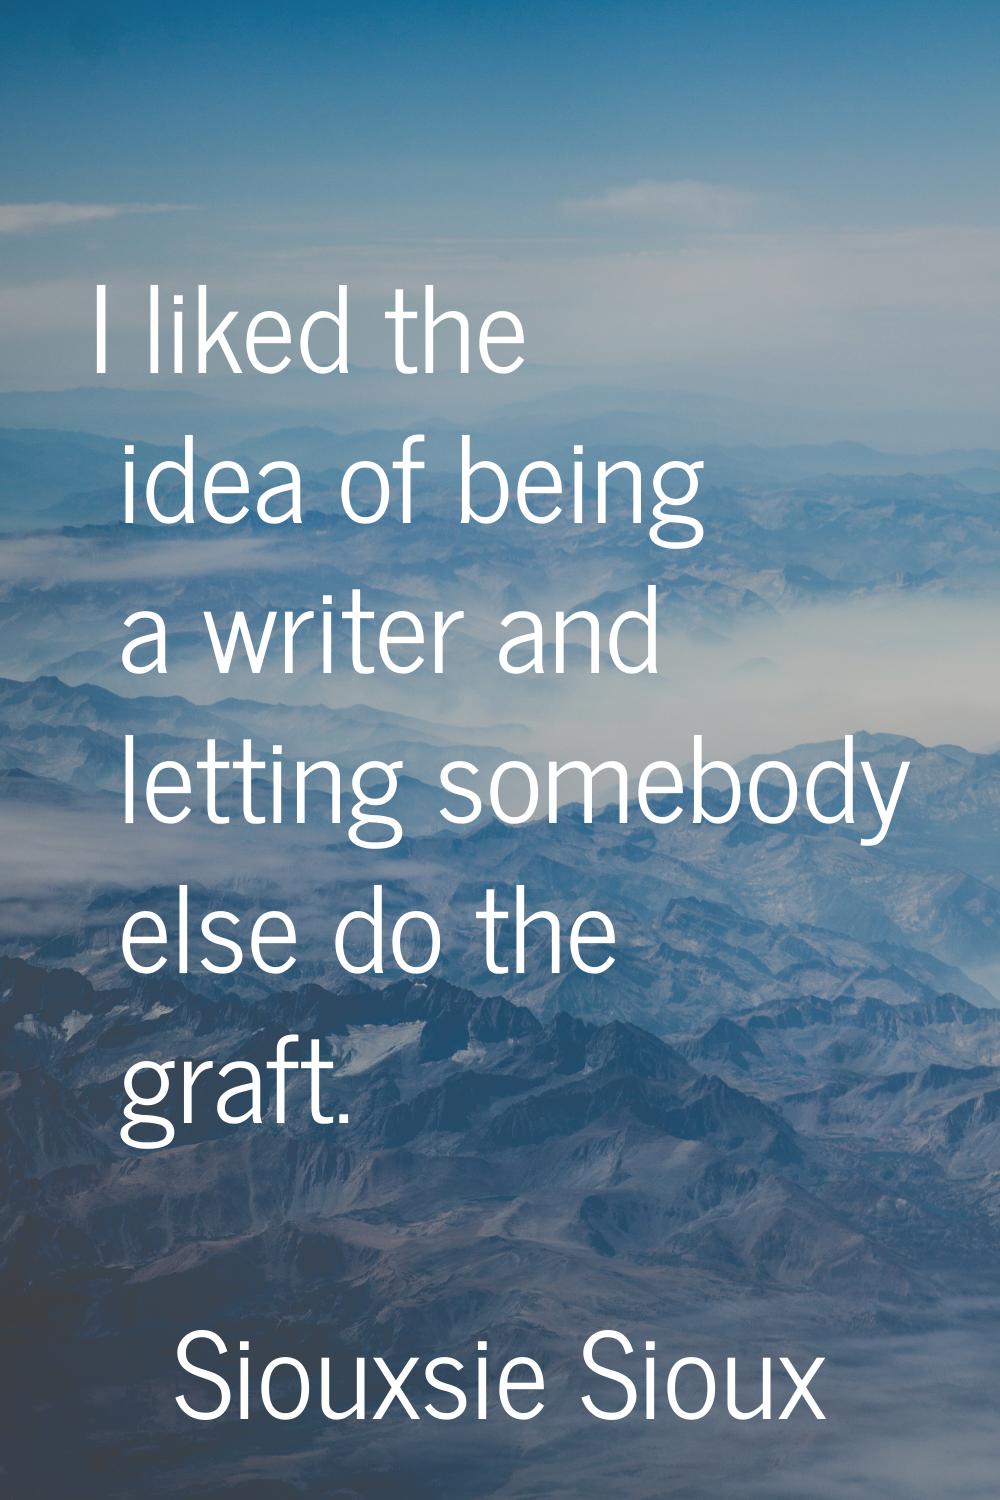 I liked the idea of being a writer and letting somebody else do the graft.